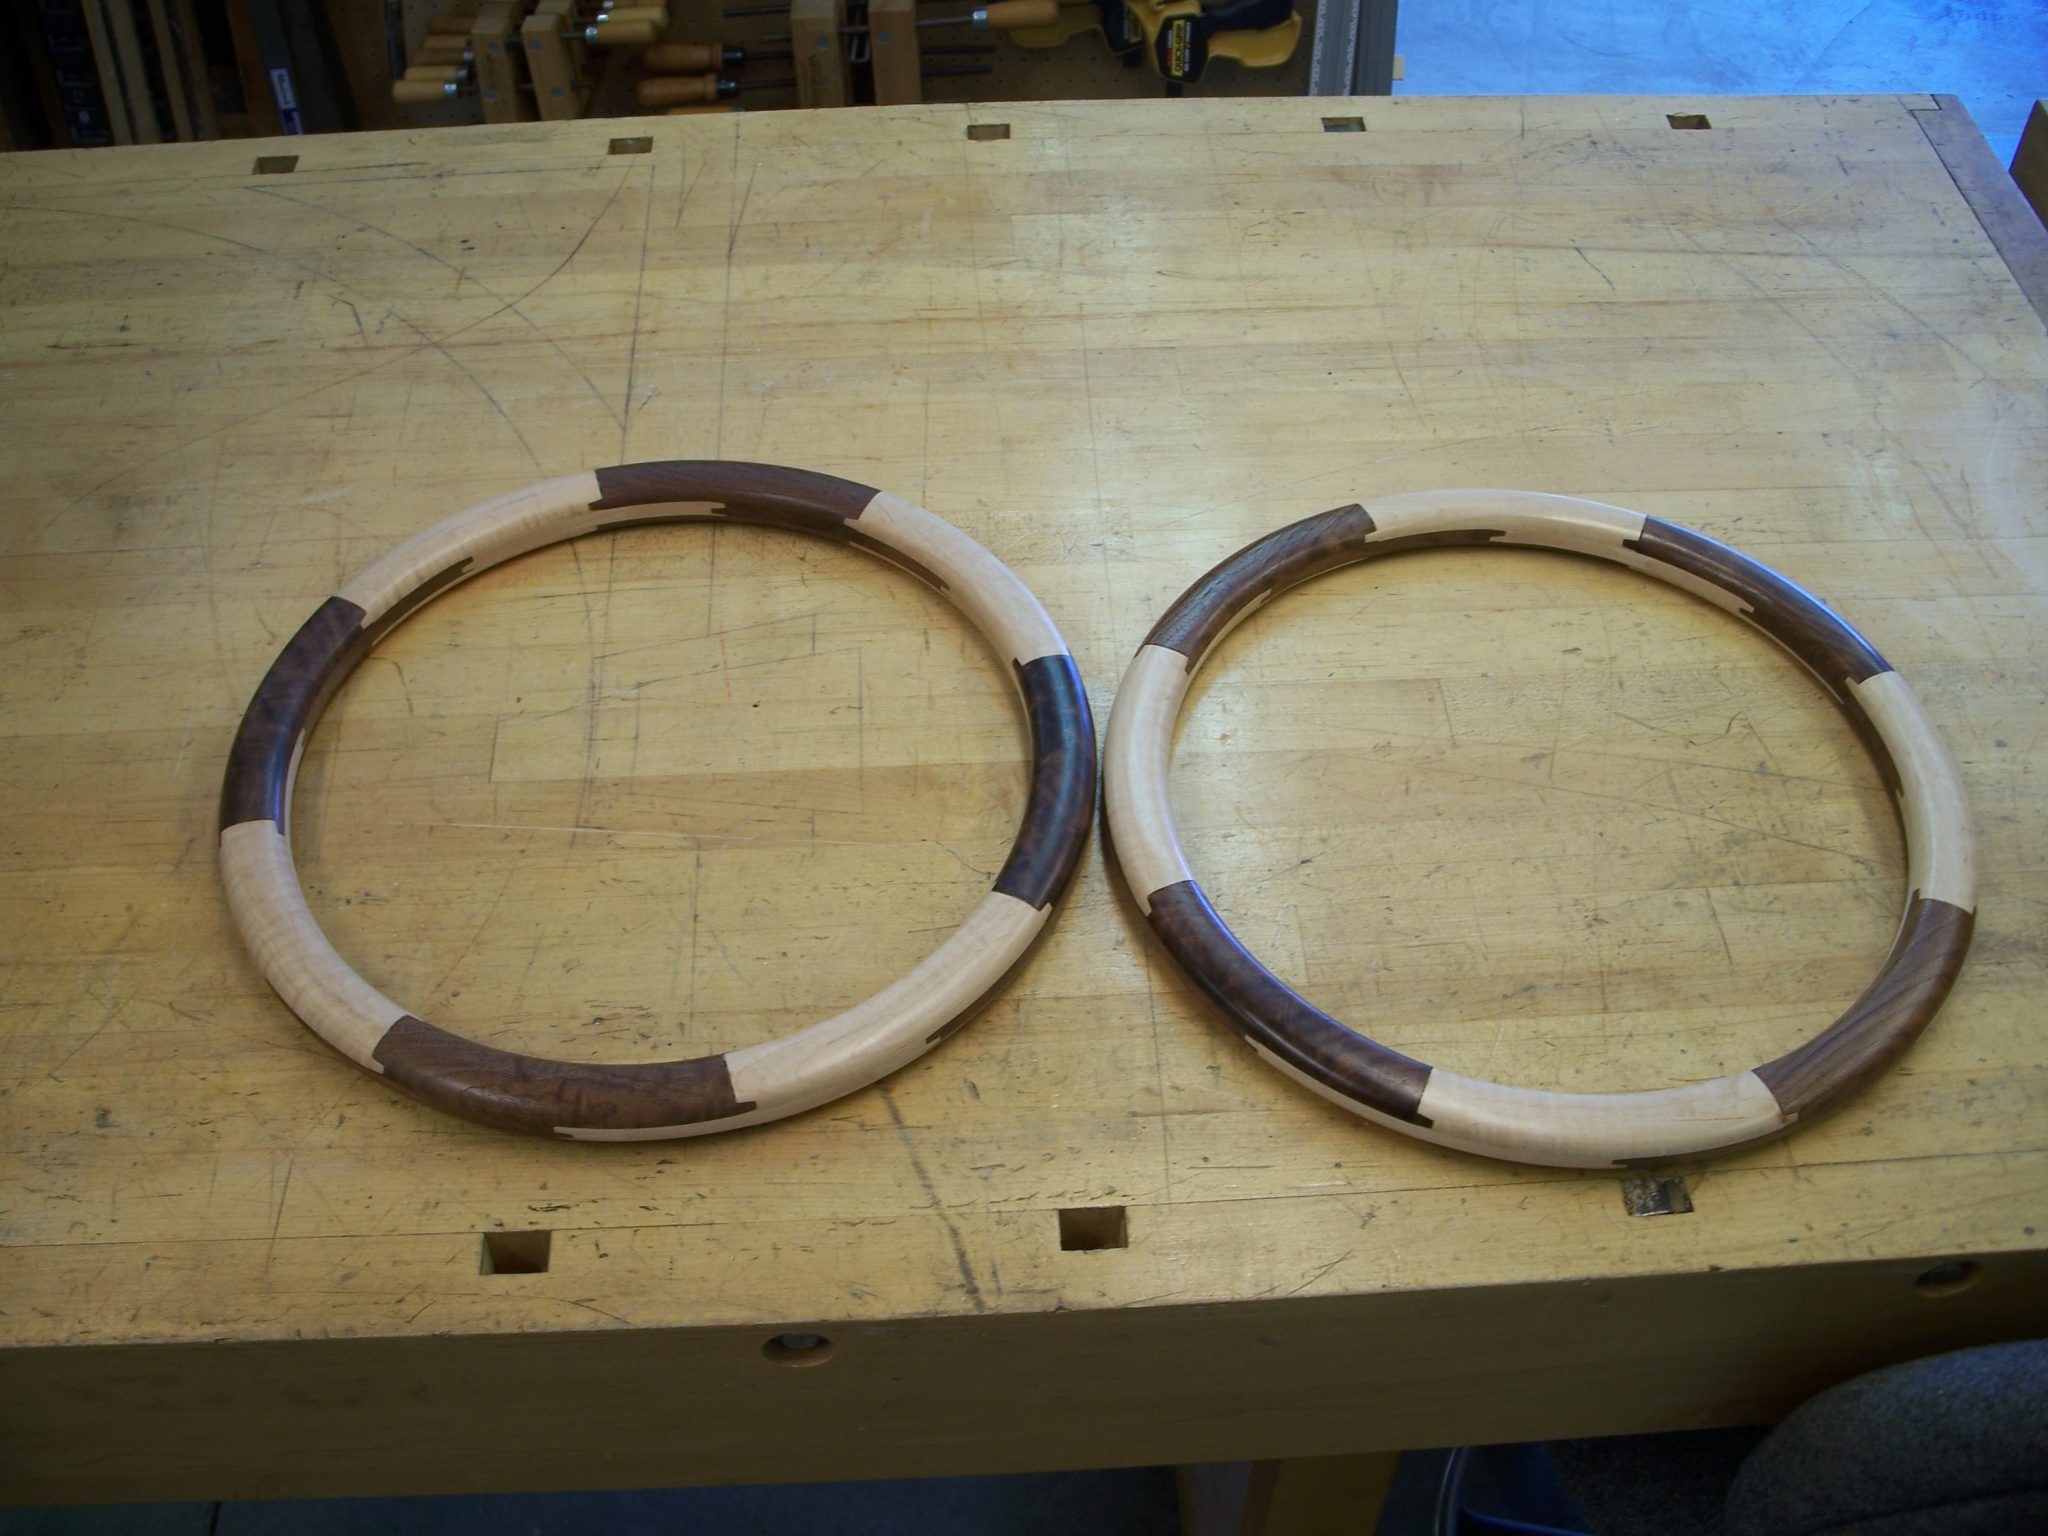 Figured Walnut and Curly Maple steering wheel for a 1914 Ford Pick Up Truck.
Finger jointed, segmented and laminated.
Made with Jigs and router, not turned.